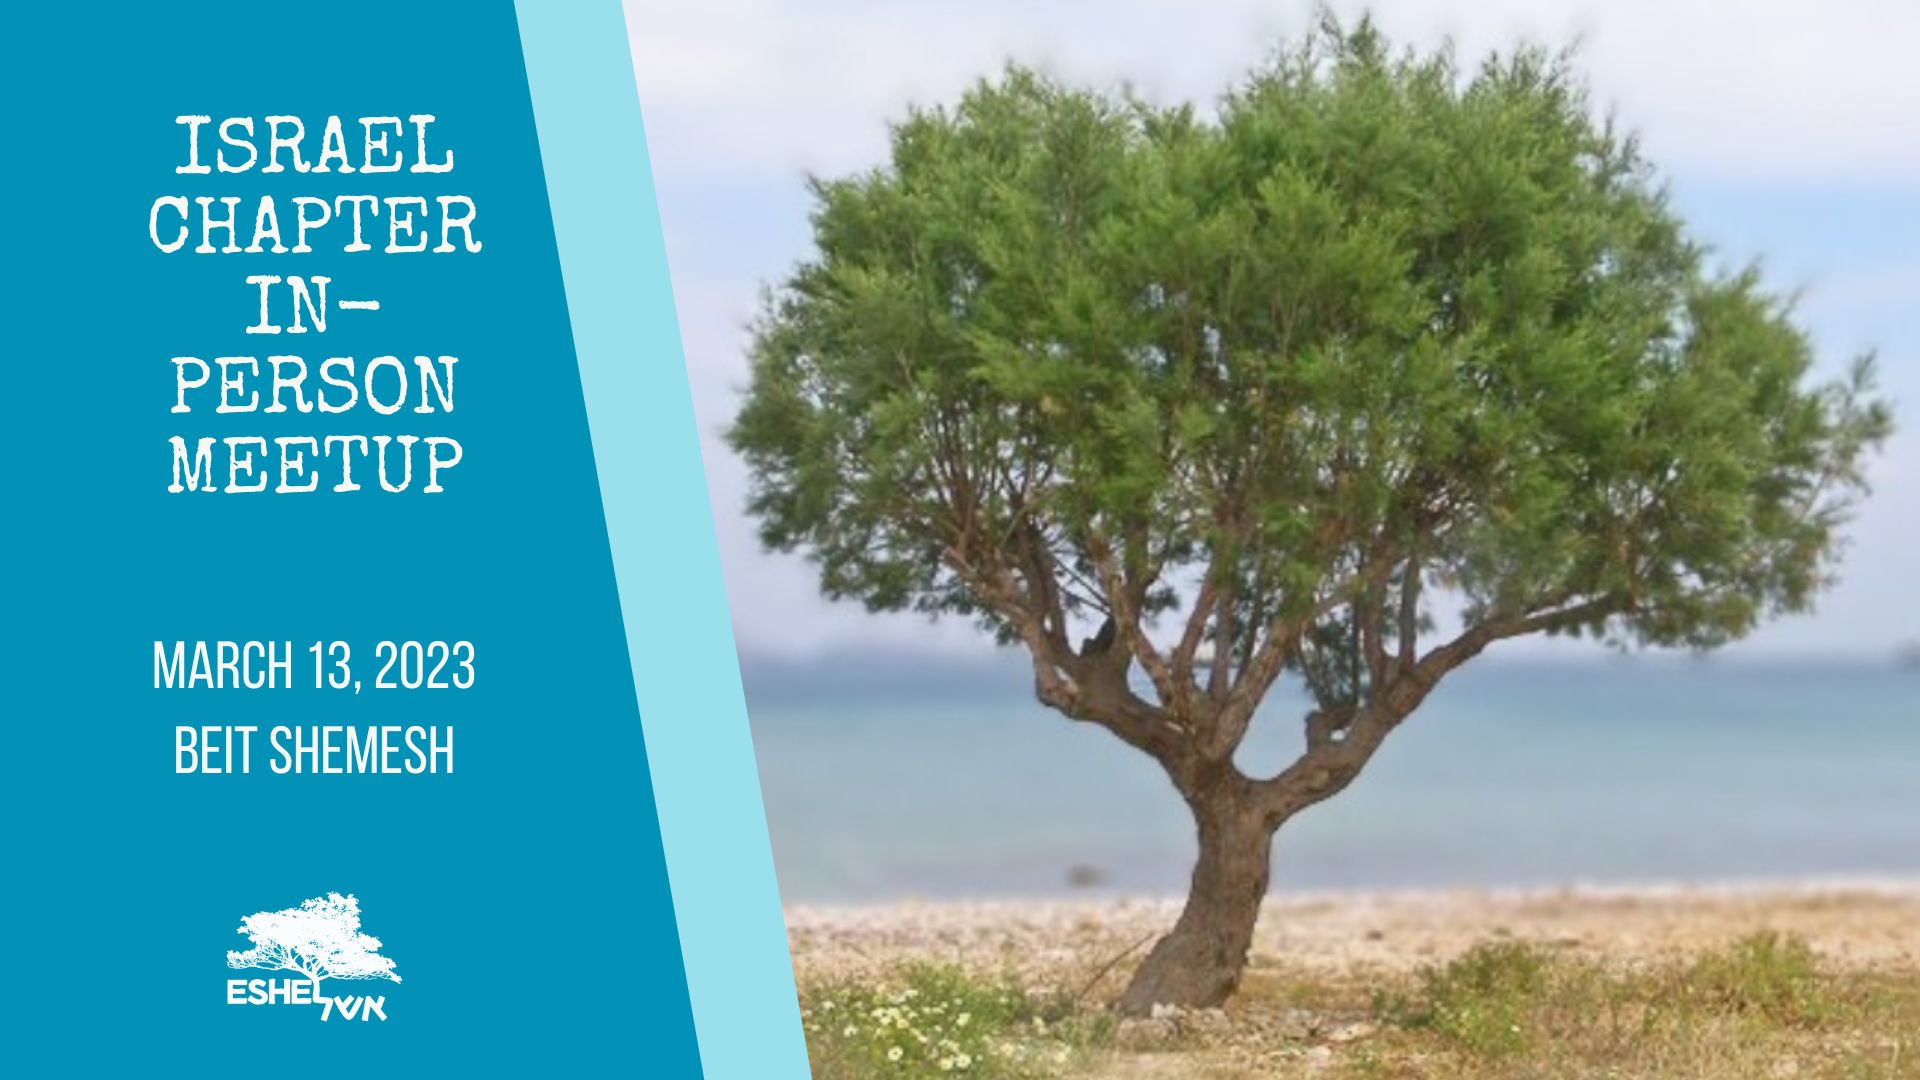 Israel Chapter In-Person Meetup: March 13, 2023, Beit Shemesh